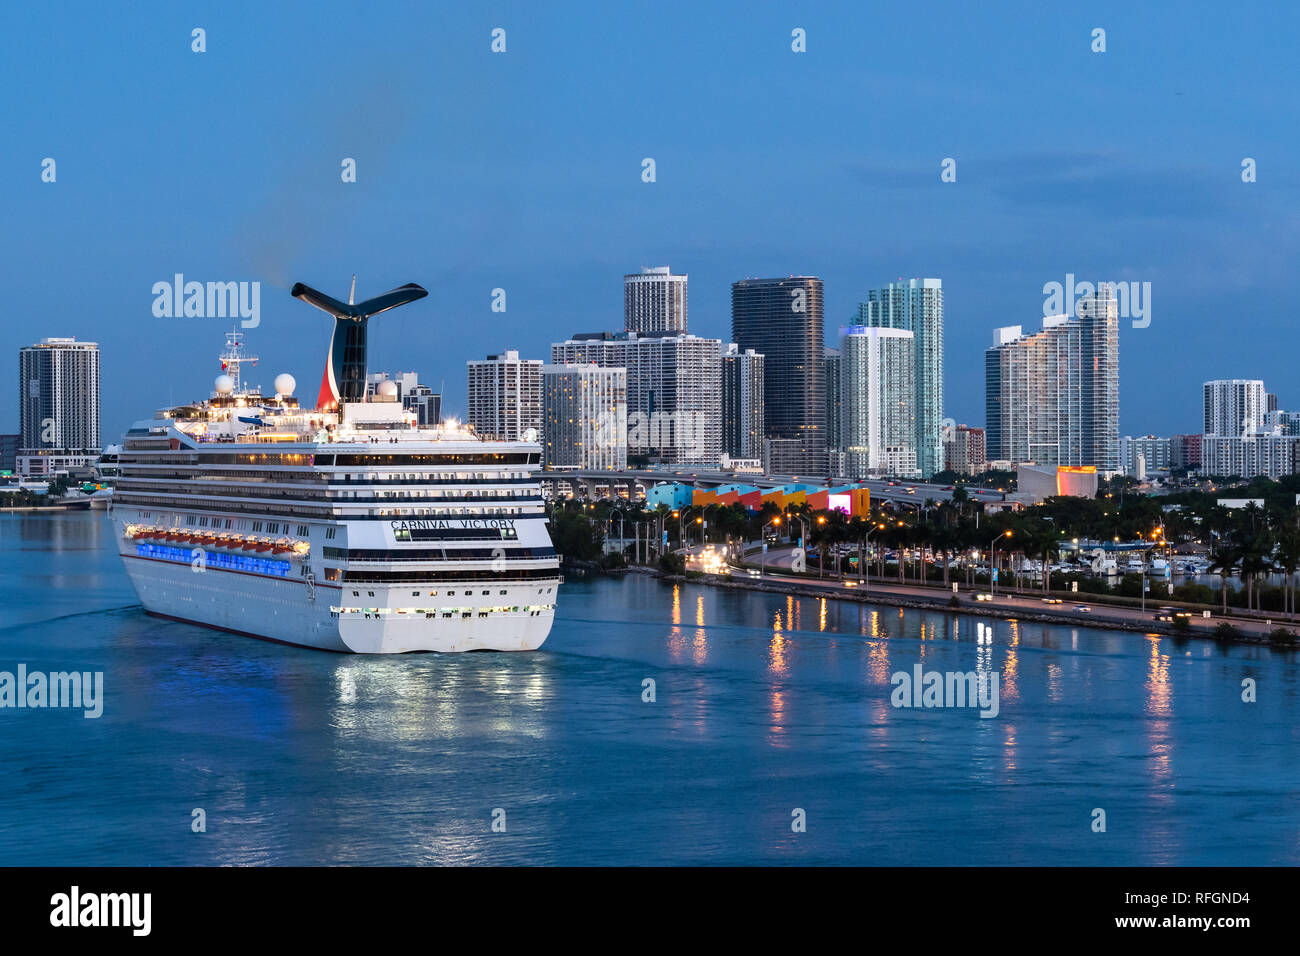 Miami, Florida - November 19 2018: Carnival Victory Cruise Ship sailing in the Port of Miami at sunrise with skyline of downtown Miami in the backgrou Stock Photo